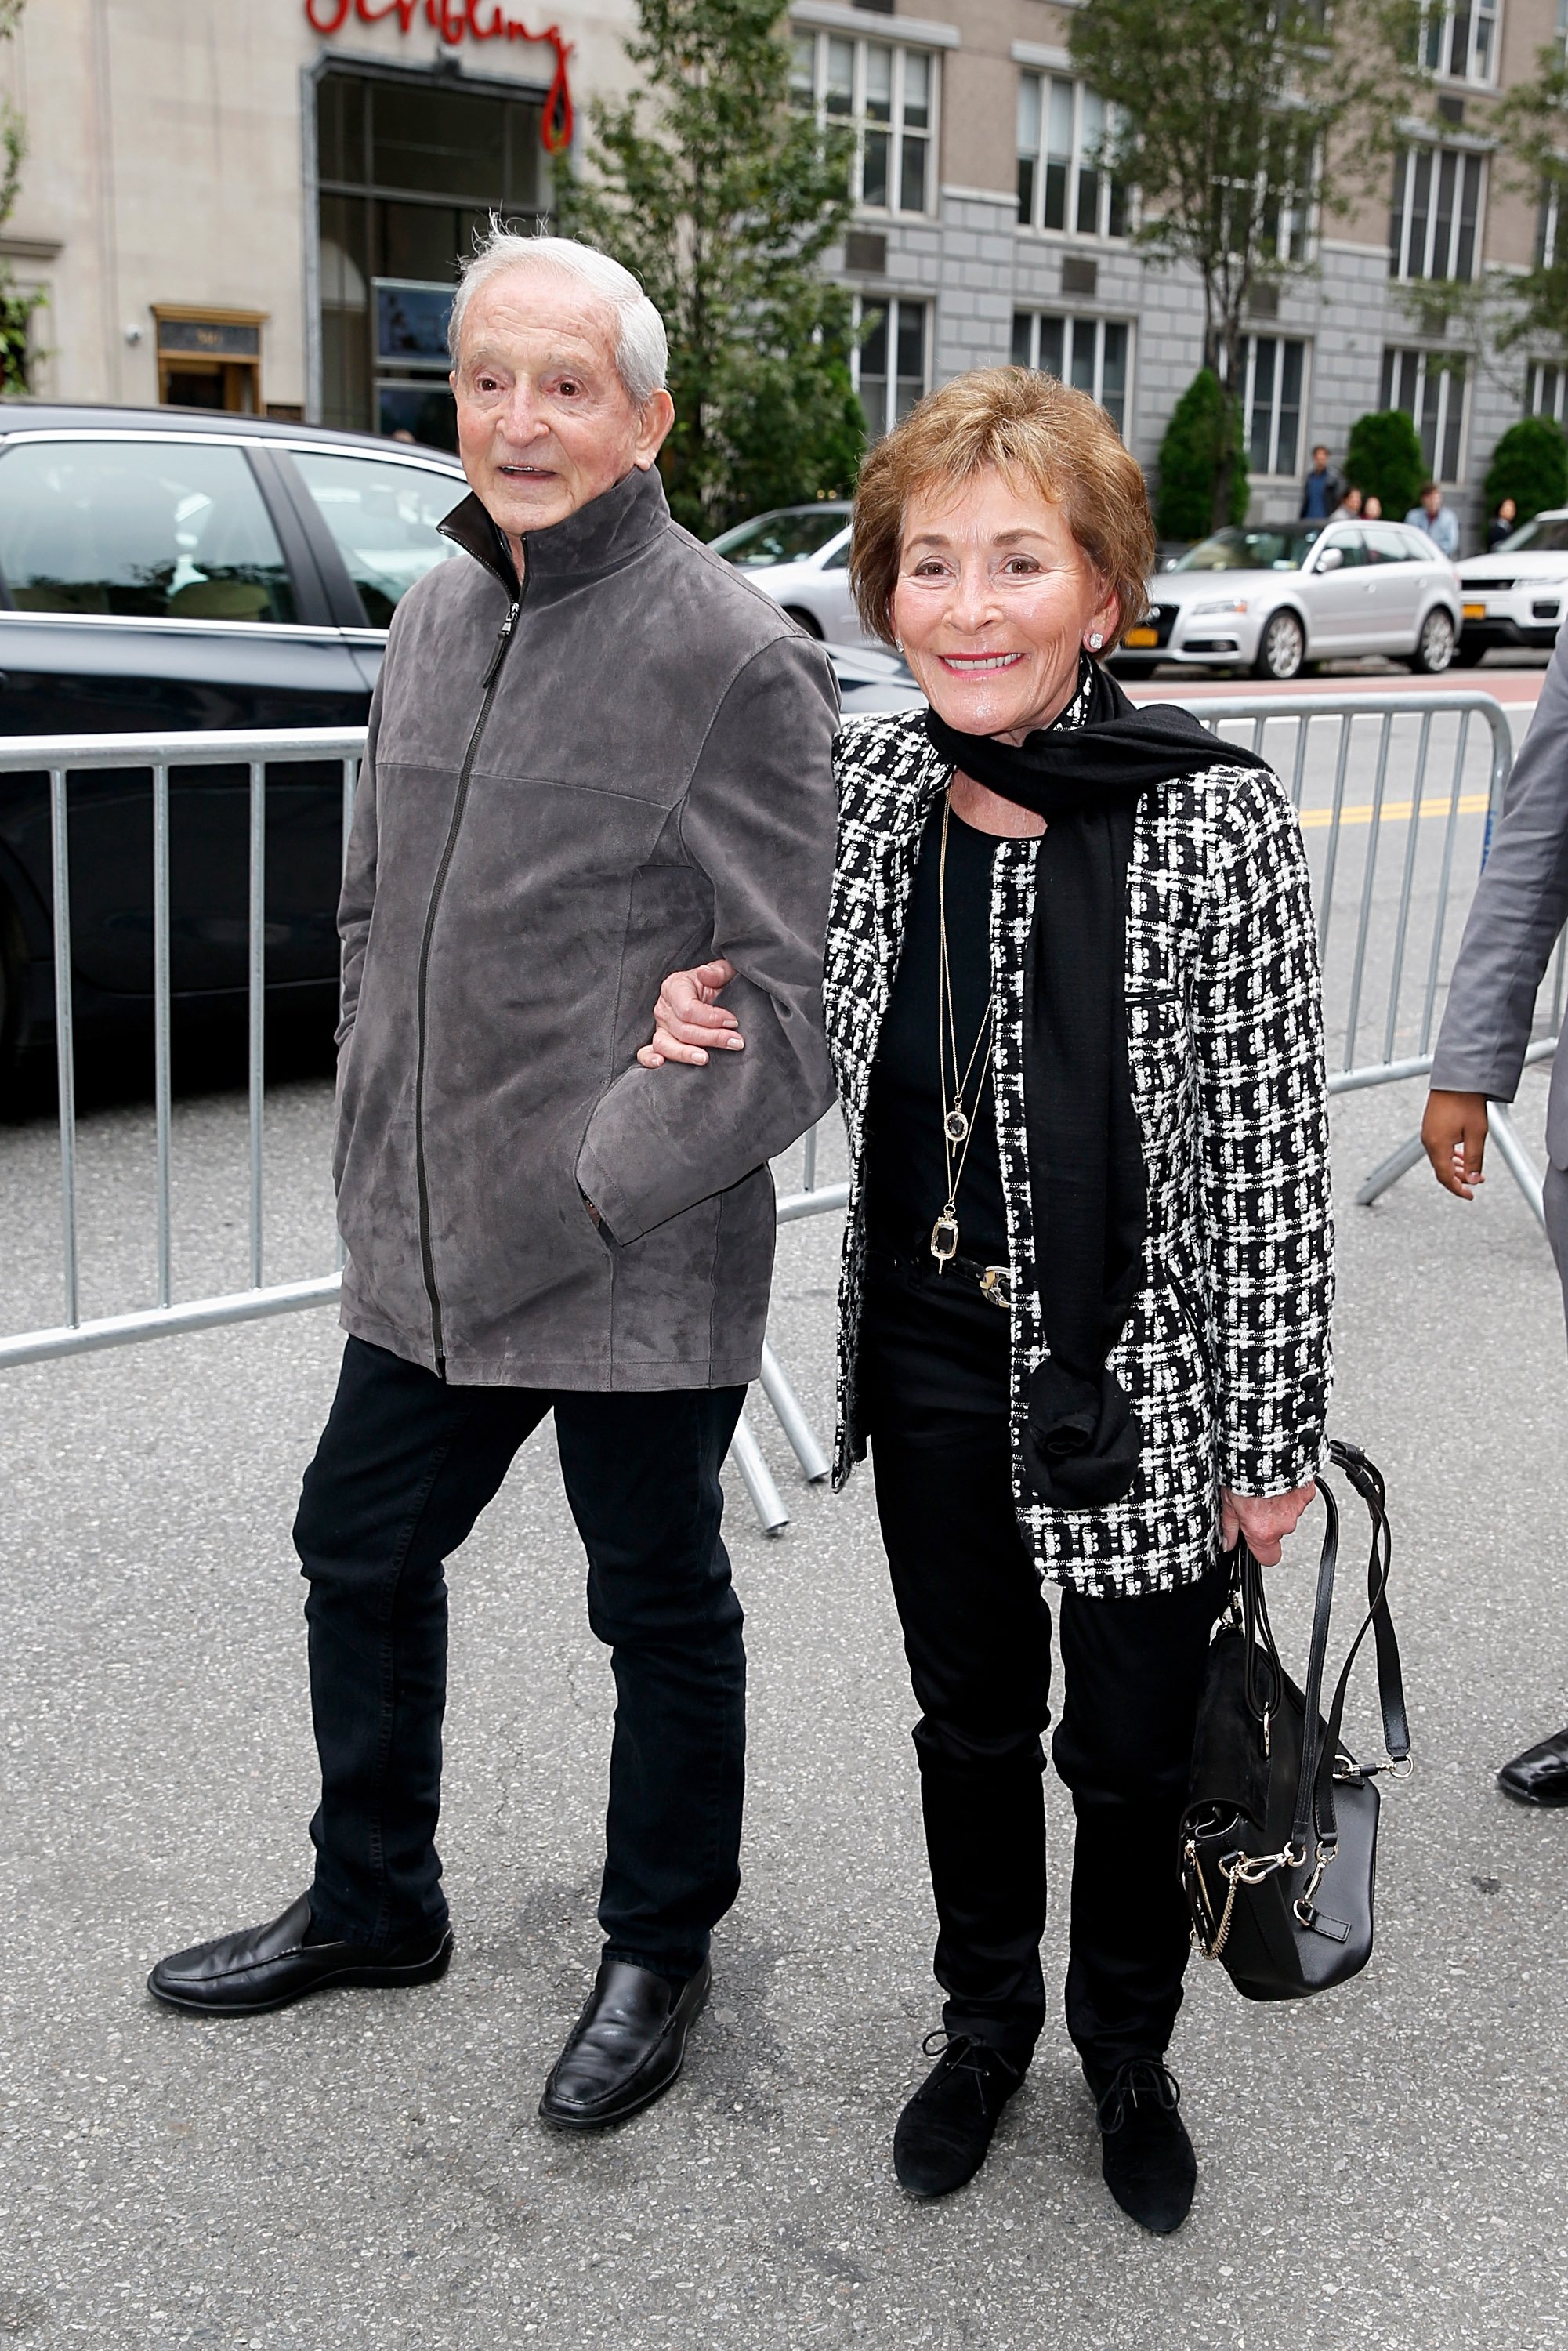 Judge Judy Sheindlin and husband Jerry Sheindlin are seen on October 14, 2018 in New York City. | Source: Getty Images